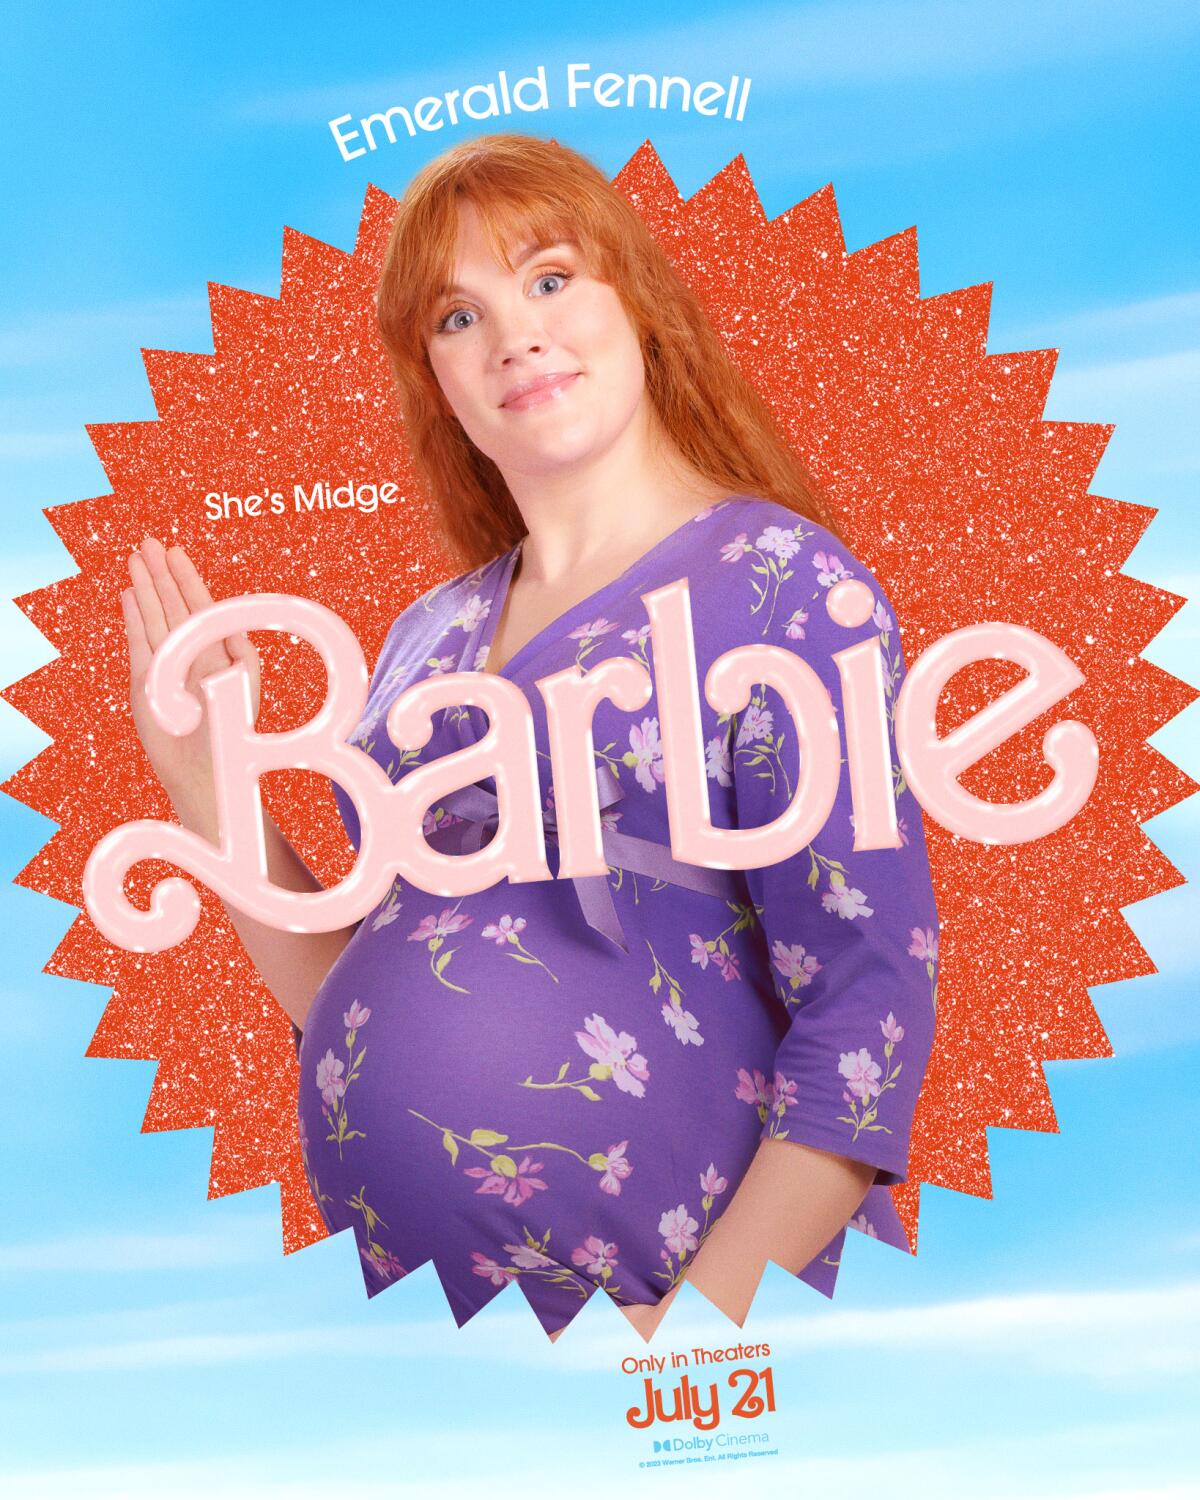 Emerald Fennell staring and waving in a "Barbie" movie poster. She appears to be pregnant and wears a purple floral dress.